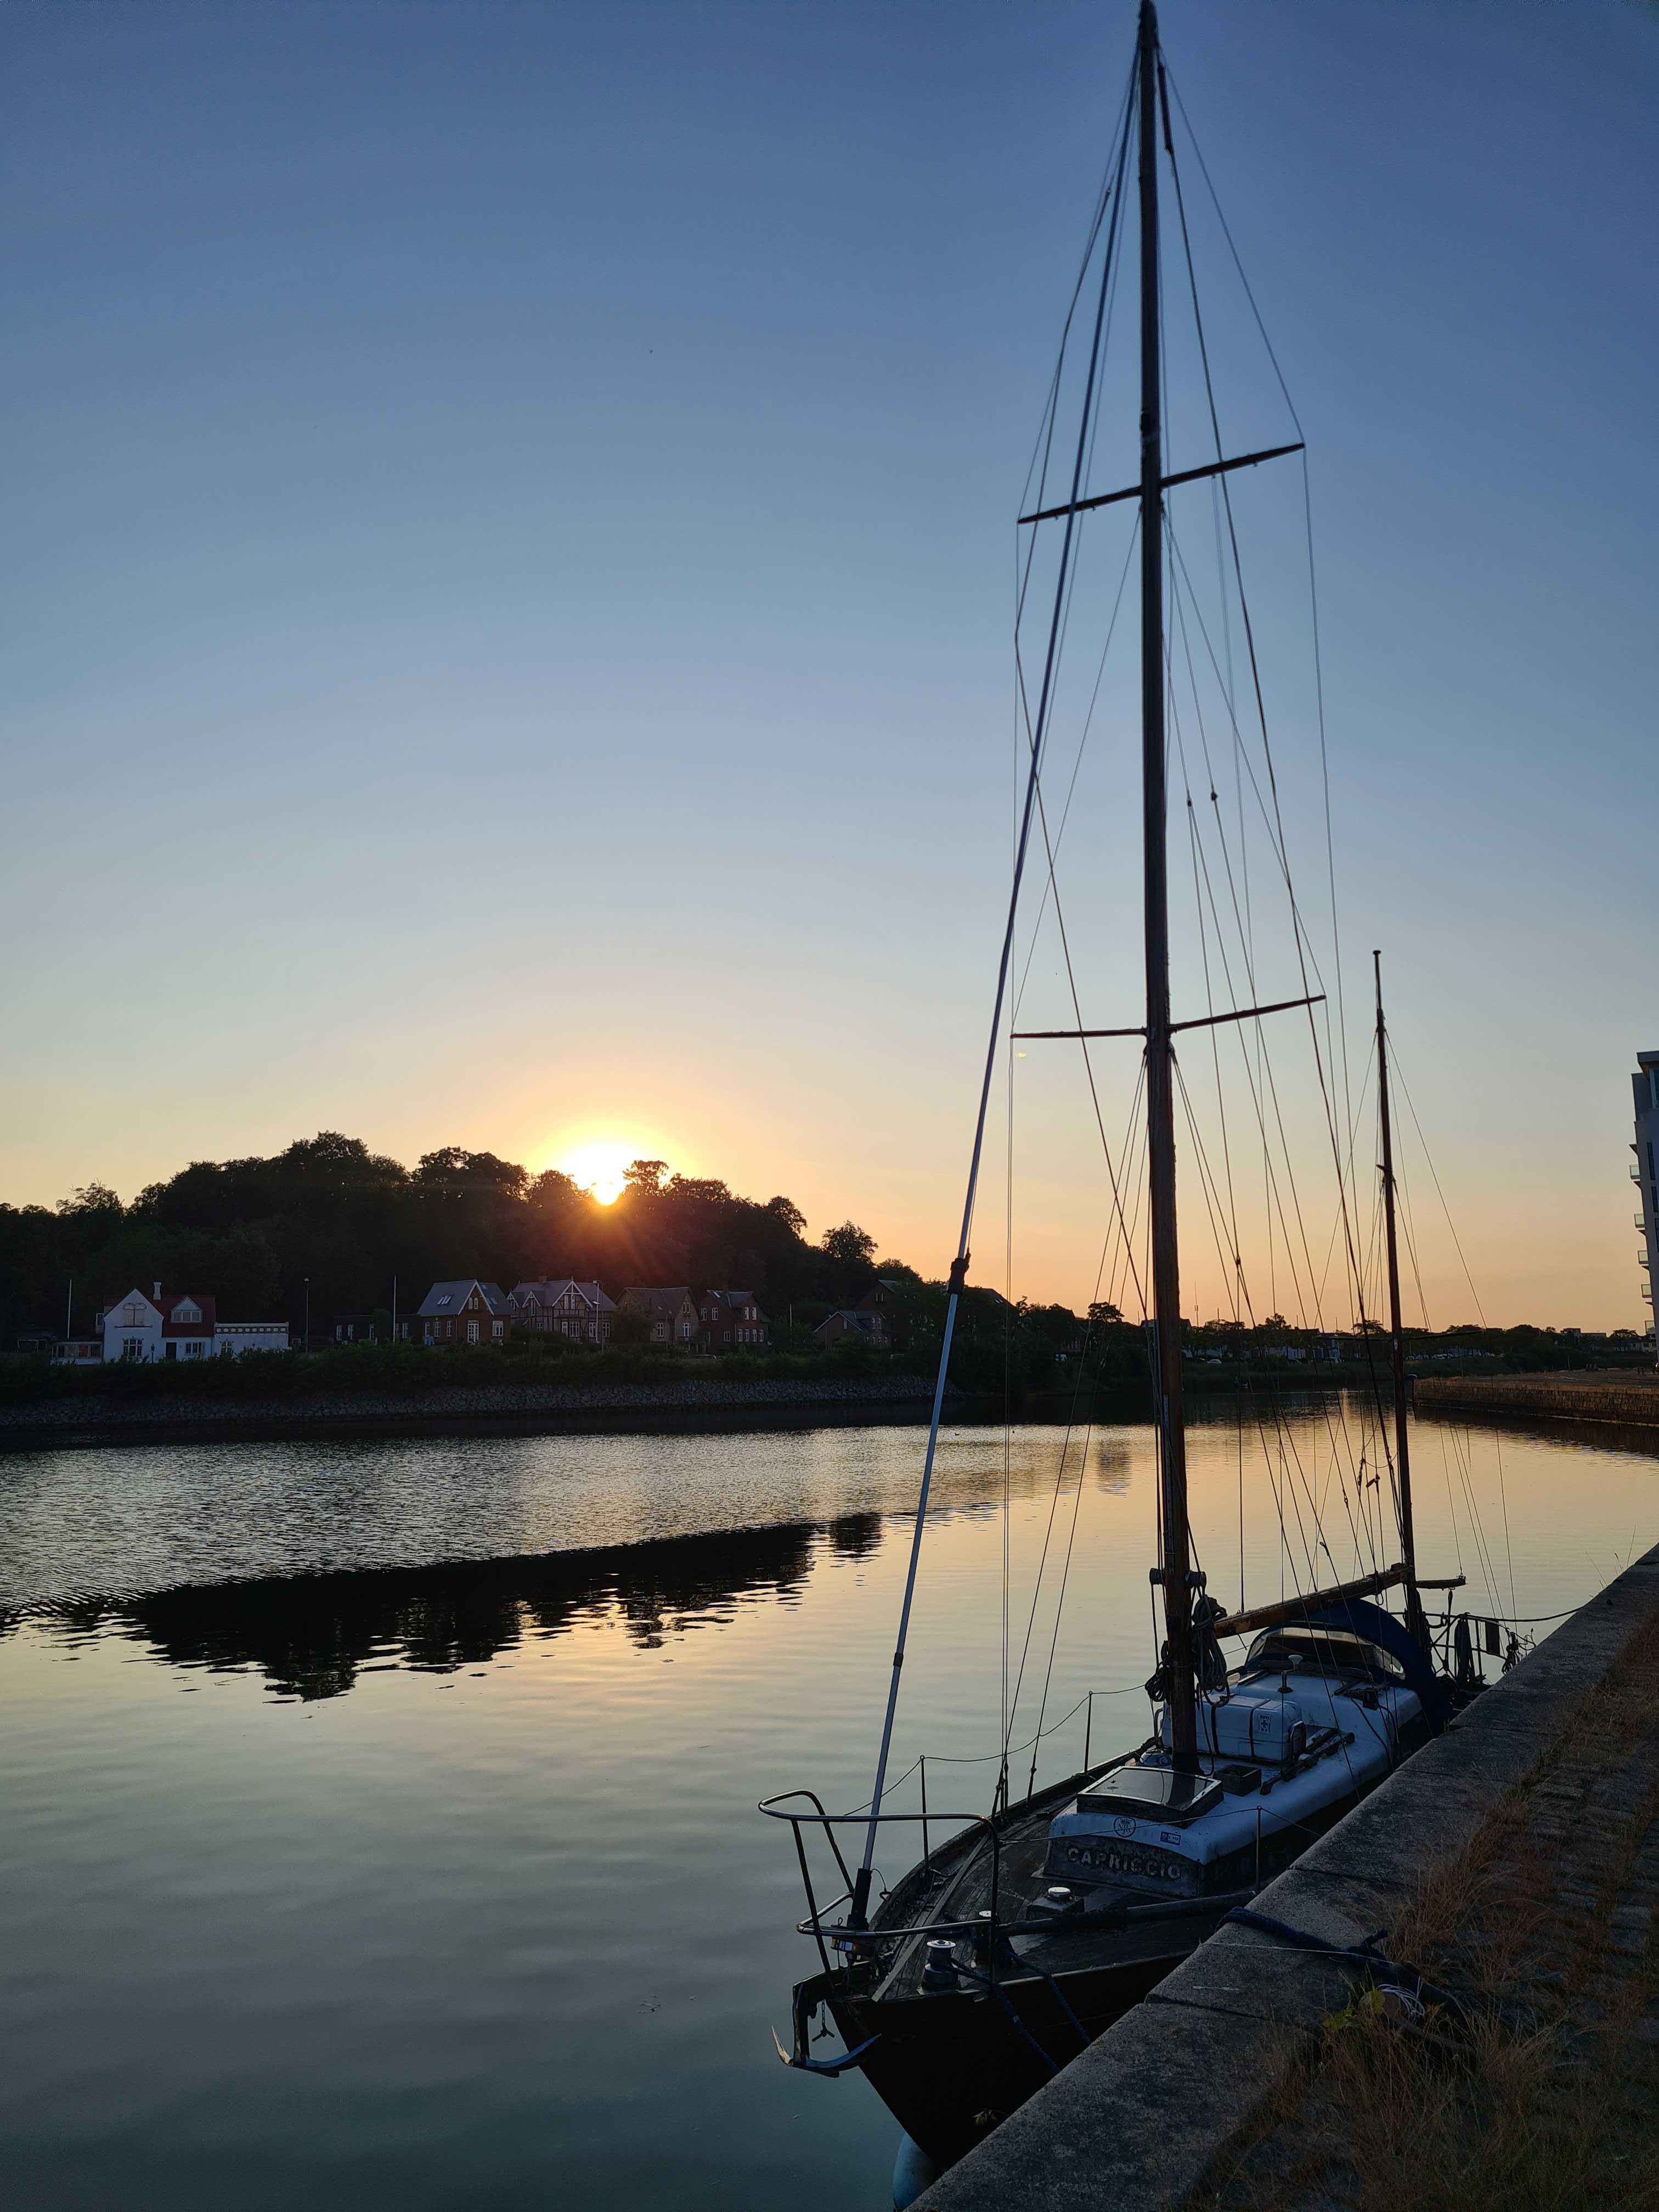 Image of a sailboat in the foreground on a canal, with the sun setting behind a row of houses and trees in the background